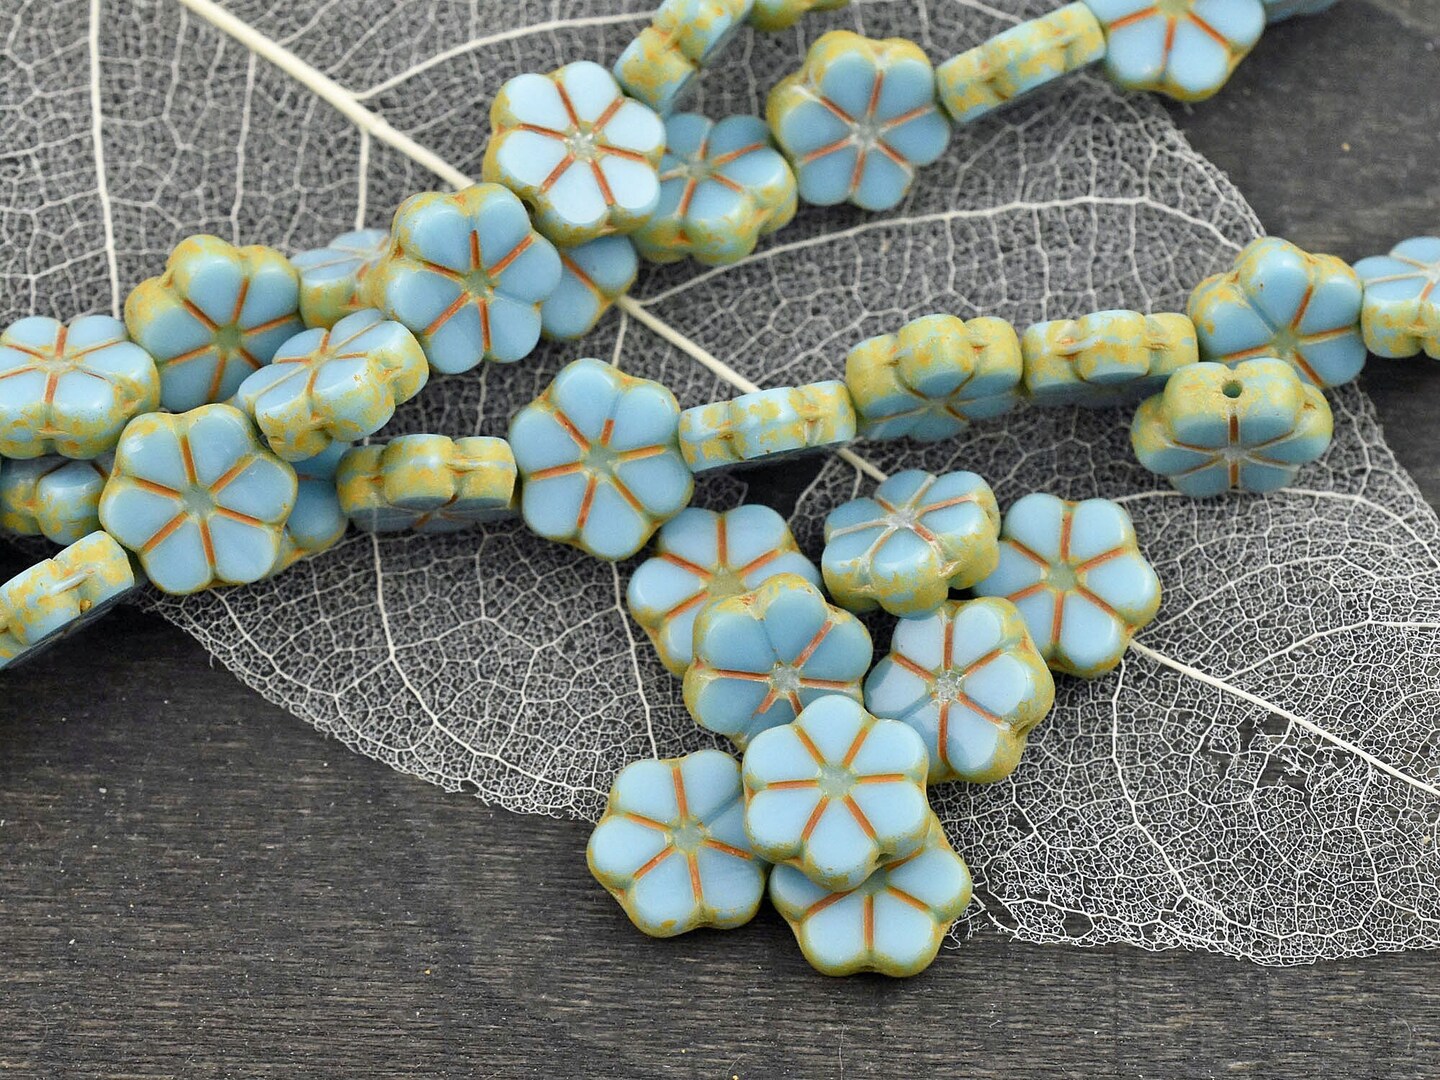 *15* 10mm Robins Egg Blue Picasso Table Cut Daisy Flower Beads